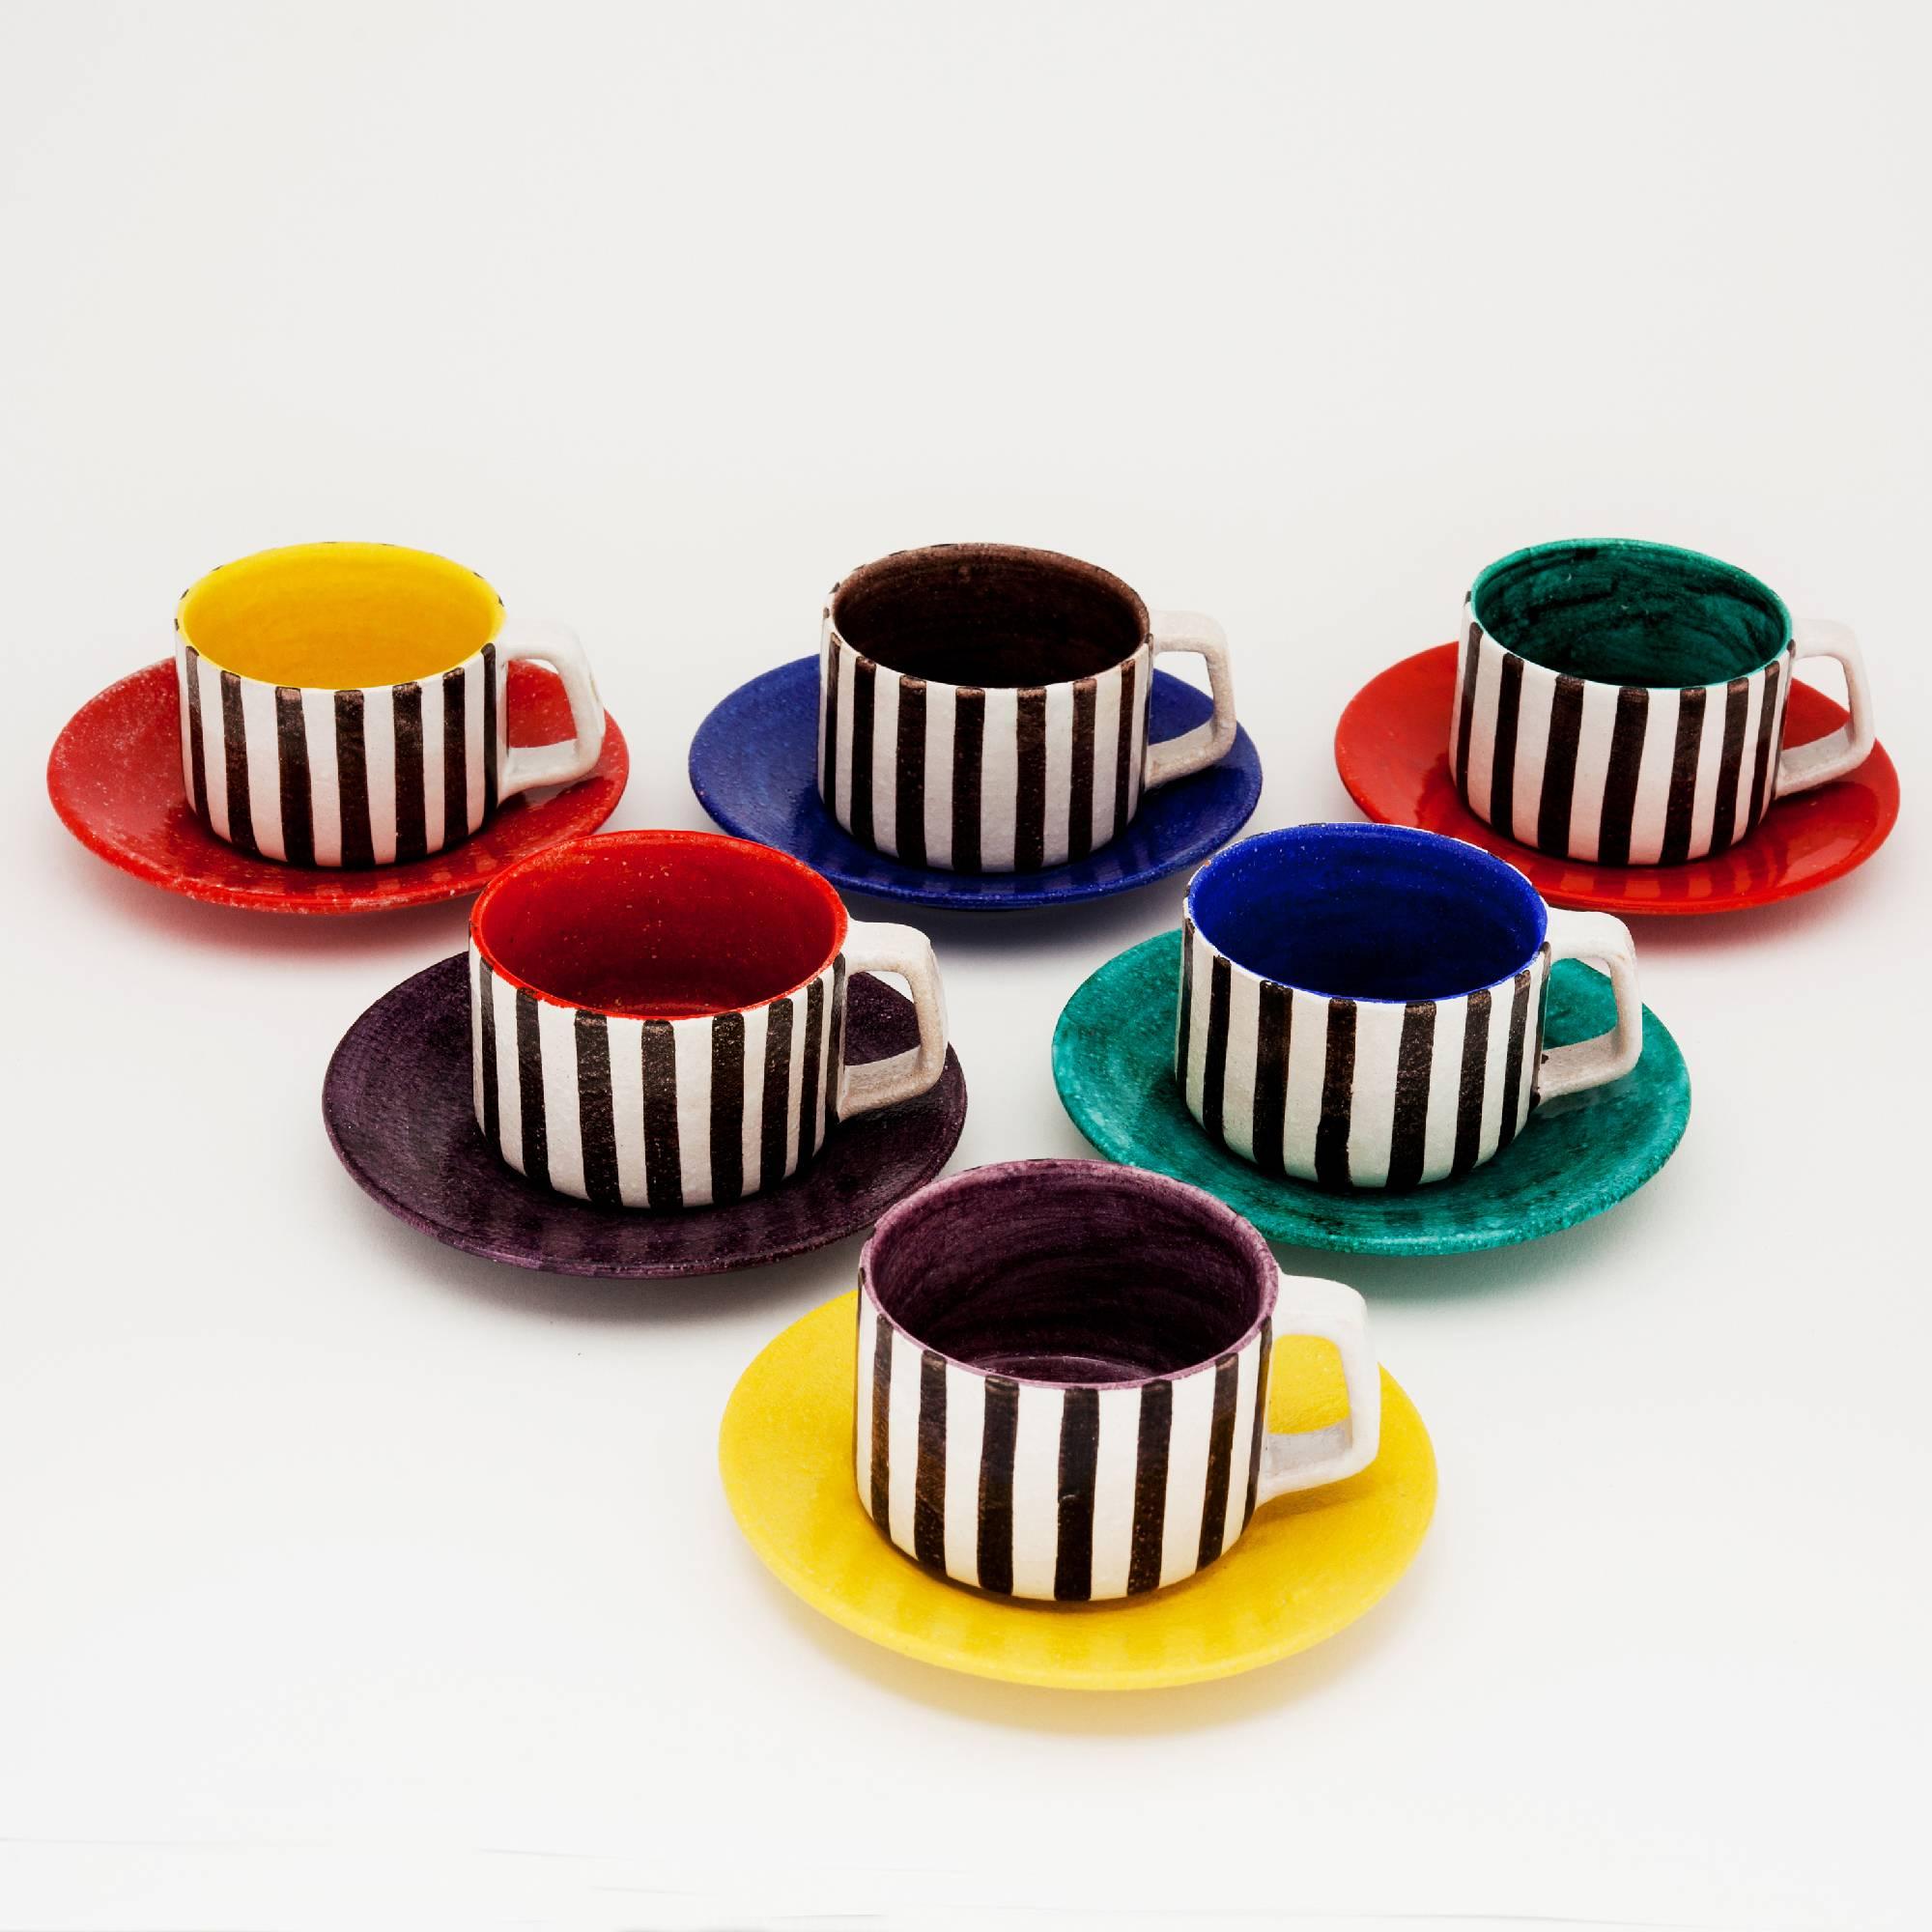 Polychrome glazed earthenware set, circa 1960, executed in studio for De Bijenkorf the Netherlands, the luxury department store of the Netherlands have worked with Gio Ponti, Marcel Breuer, Ettore Sottsass ...Measures: Cups: H 6 cm, D 9 cm. Plate: D